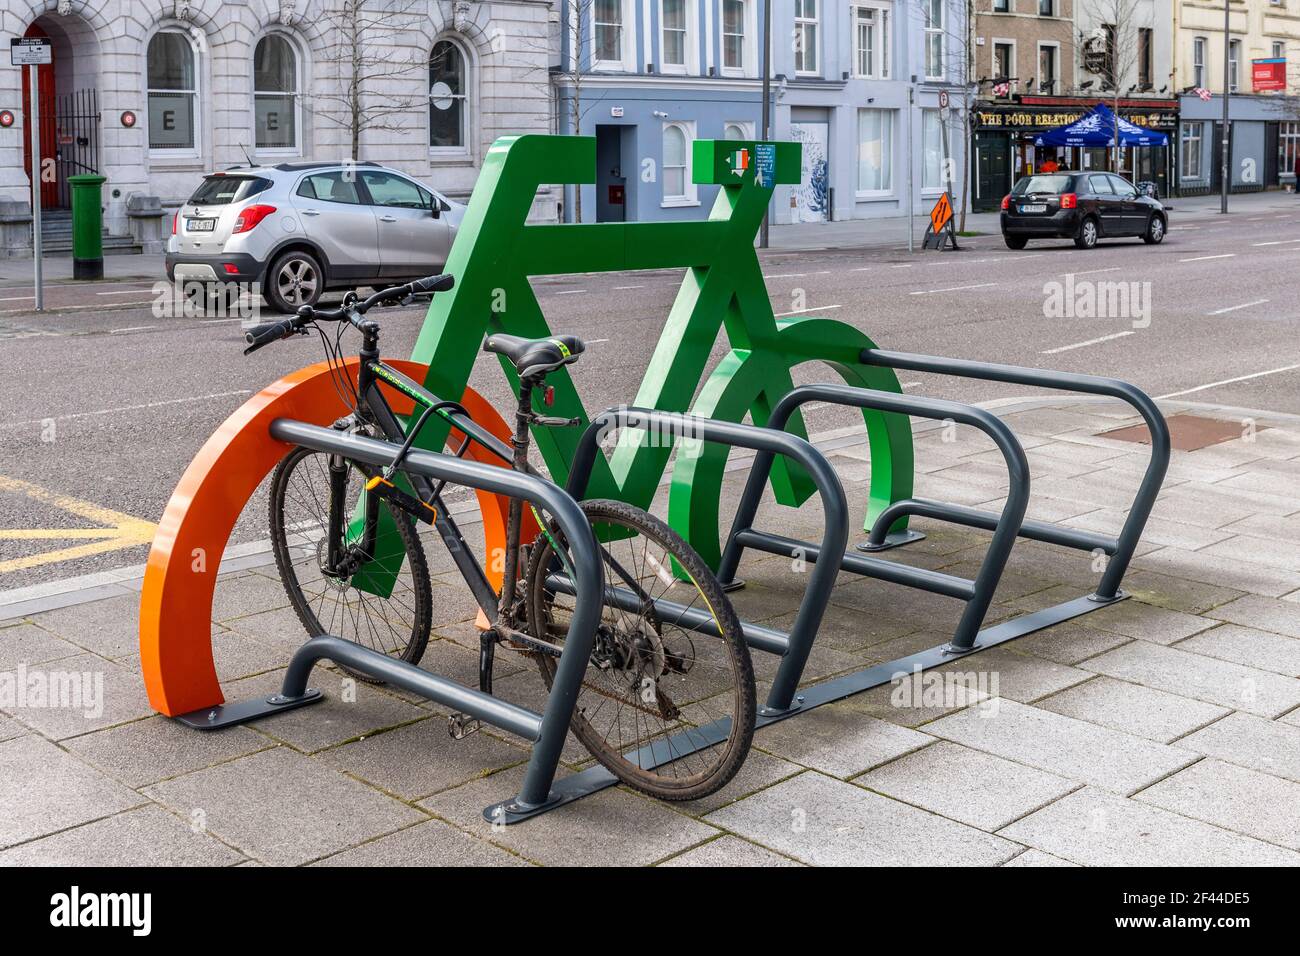 Bicycle stand in the shape of a bike in Cork City Centre, Ireland. Stock Photo